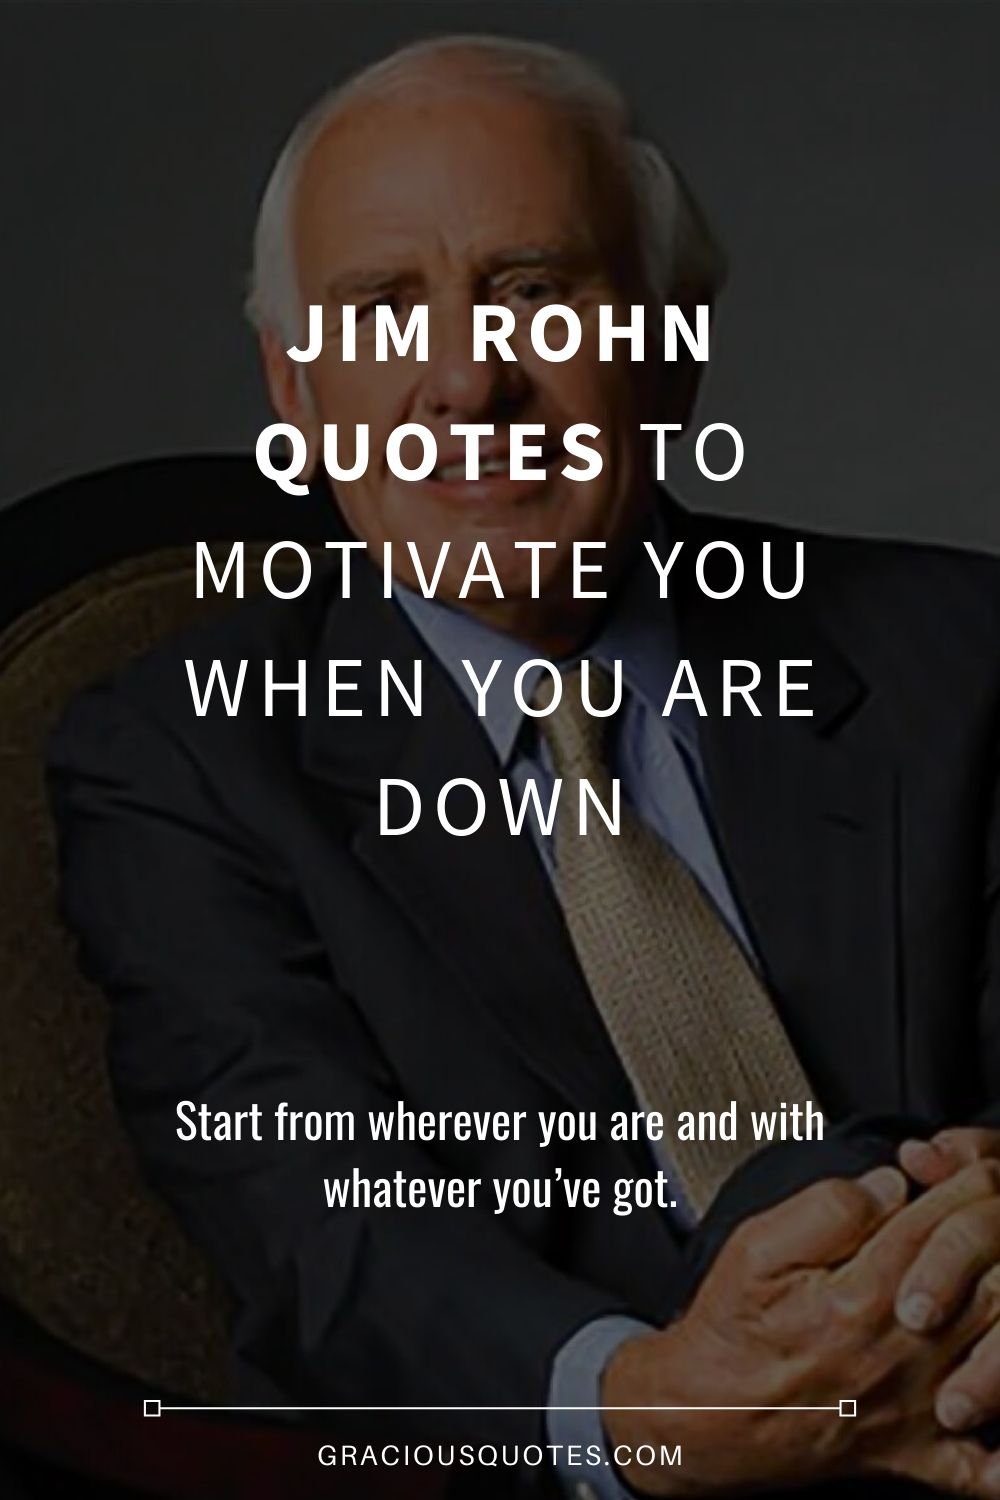 Jim Rohn Quotes to Motivate You When You Are Down - Gracious Quotes